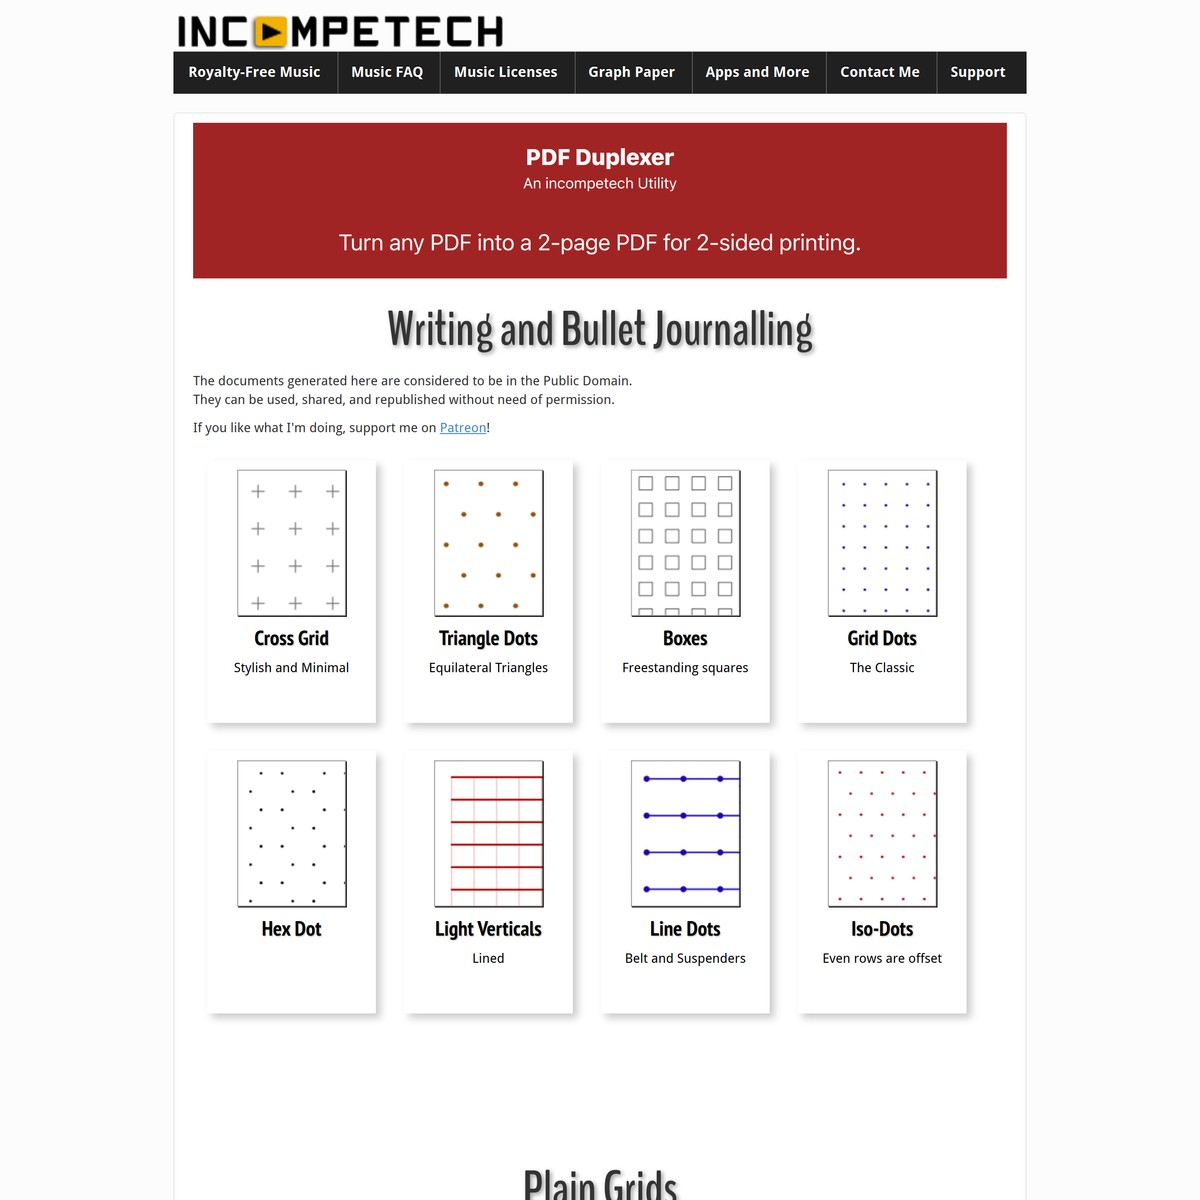 free-online-graph-paper-asymmetric-and-specialty-grid-paper-pdfs-are-na